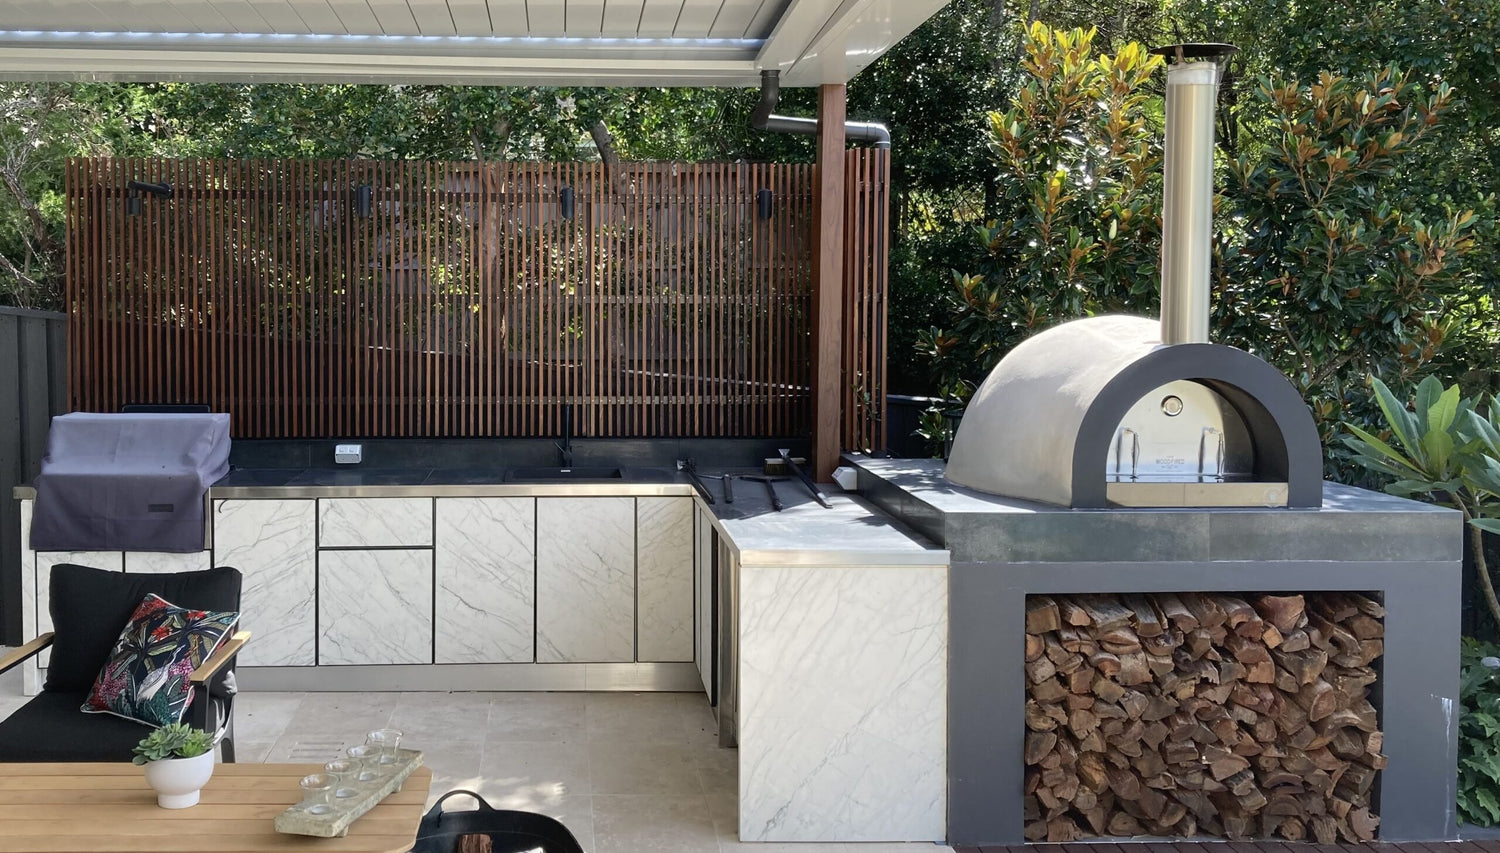 Outdoor kitchen with small wood fire oven - The Woodfired Co